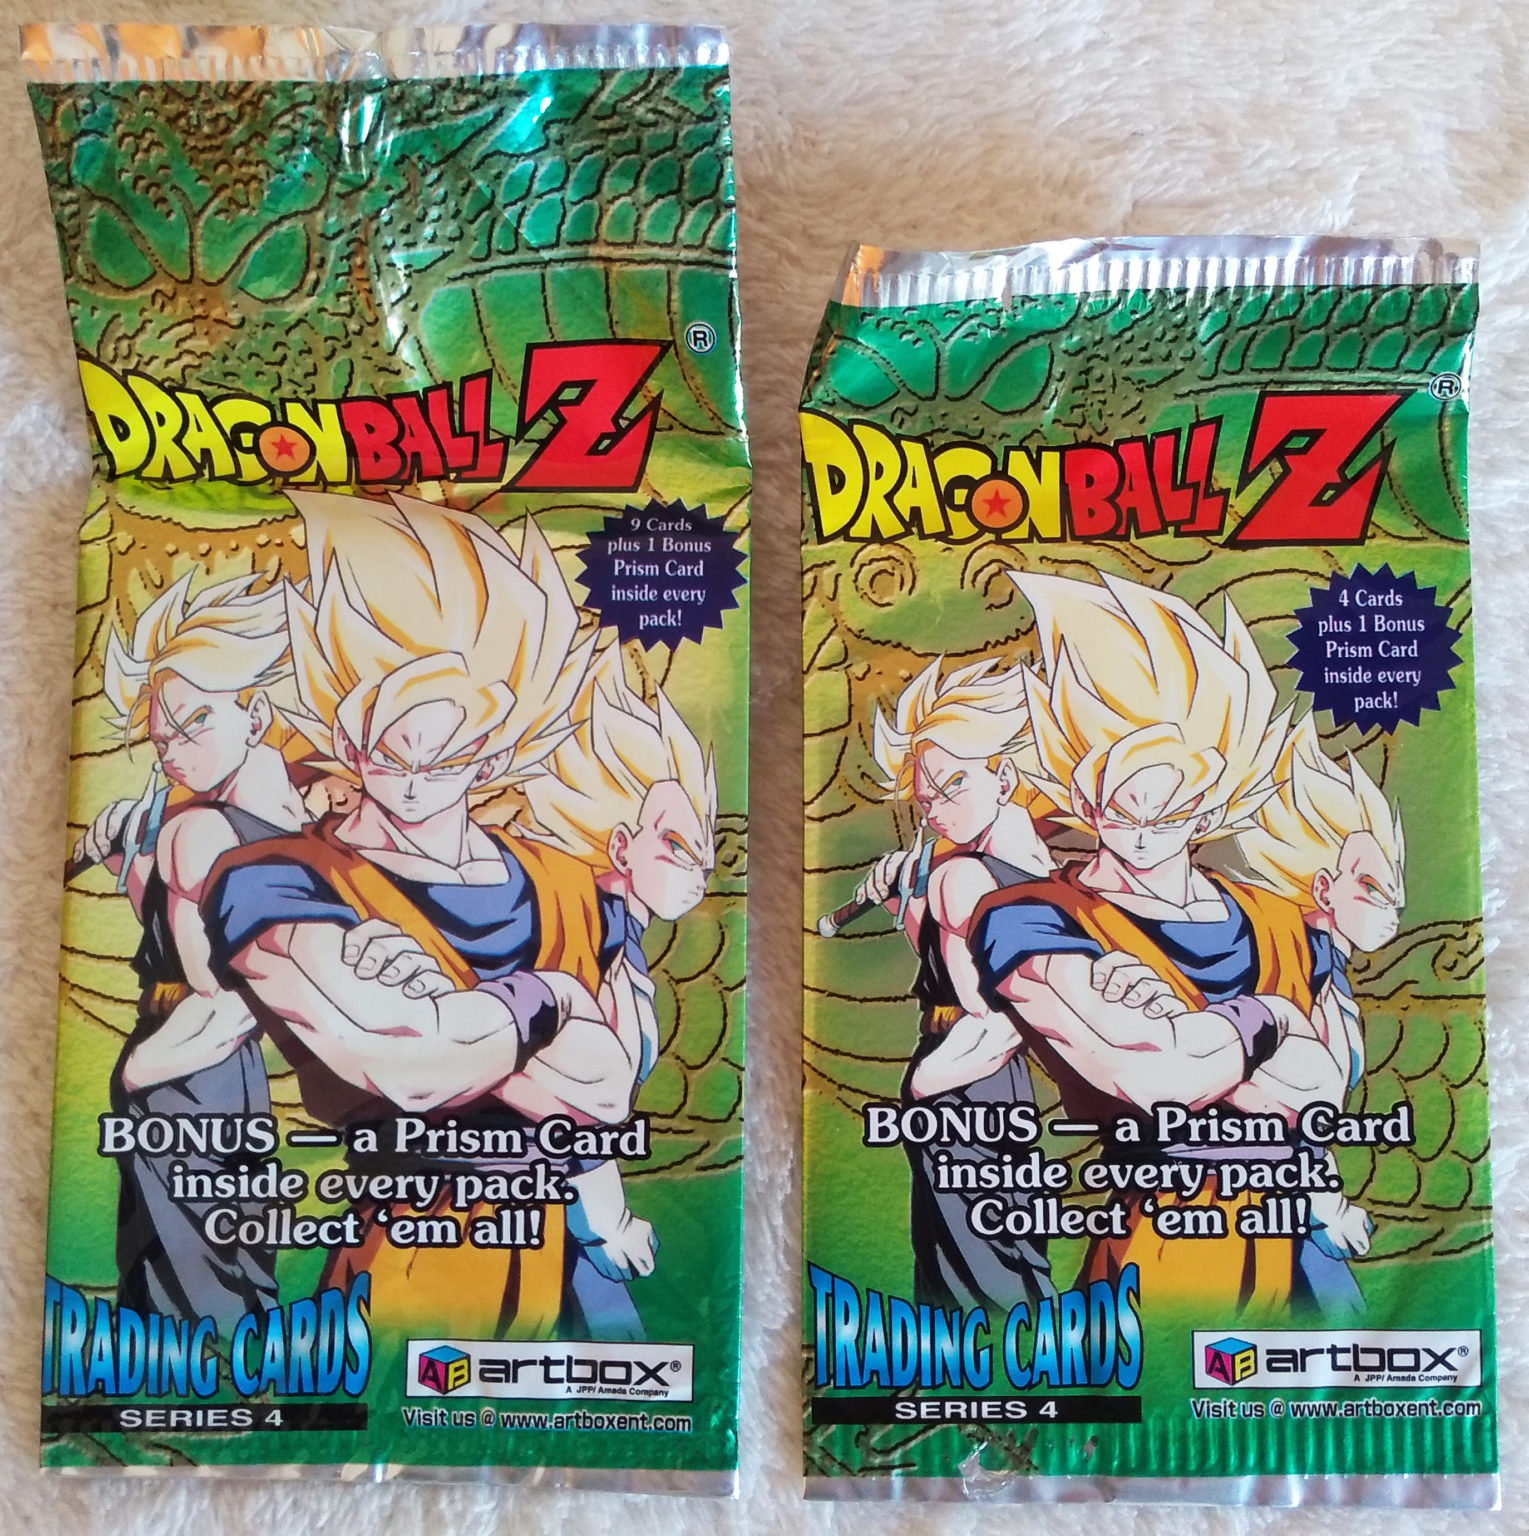 Dragonball Z Trading Cards Series 4 – Artbox – A BIT OF